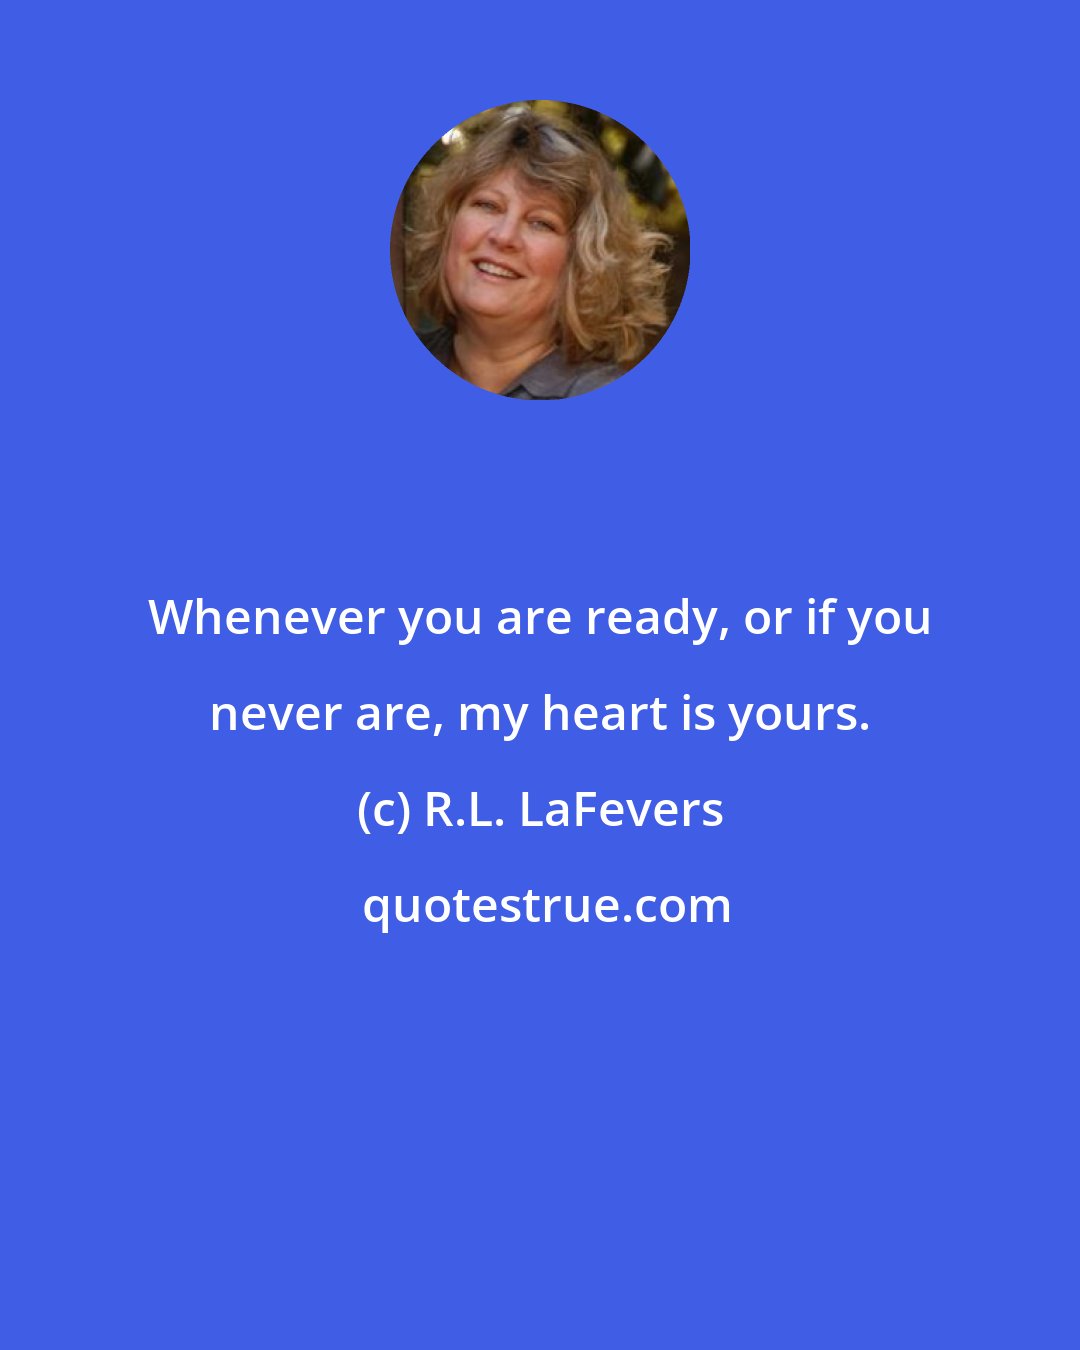 R.L. LaFevers: Whenever you are ready, or if you never are, my heart is yours.